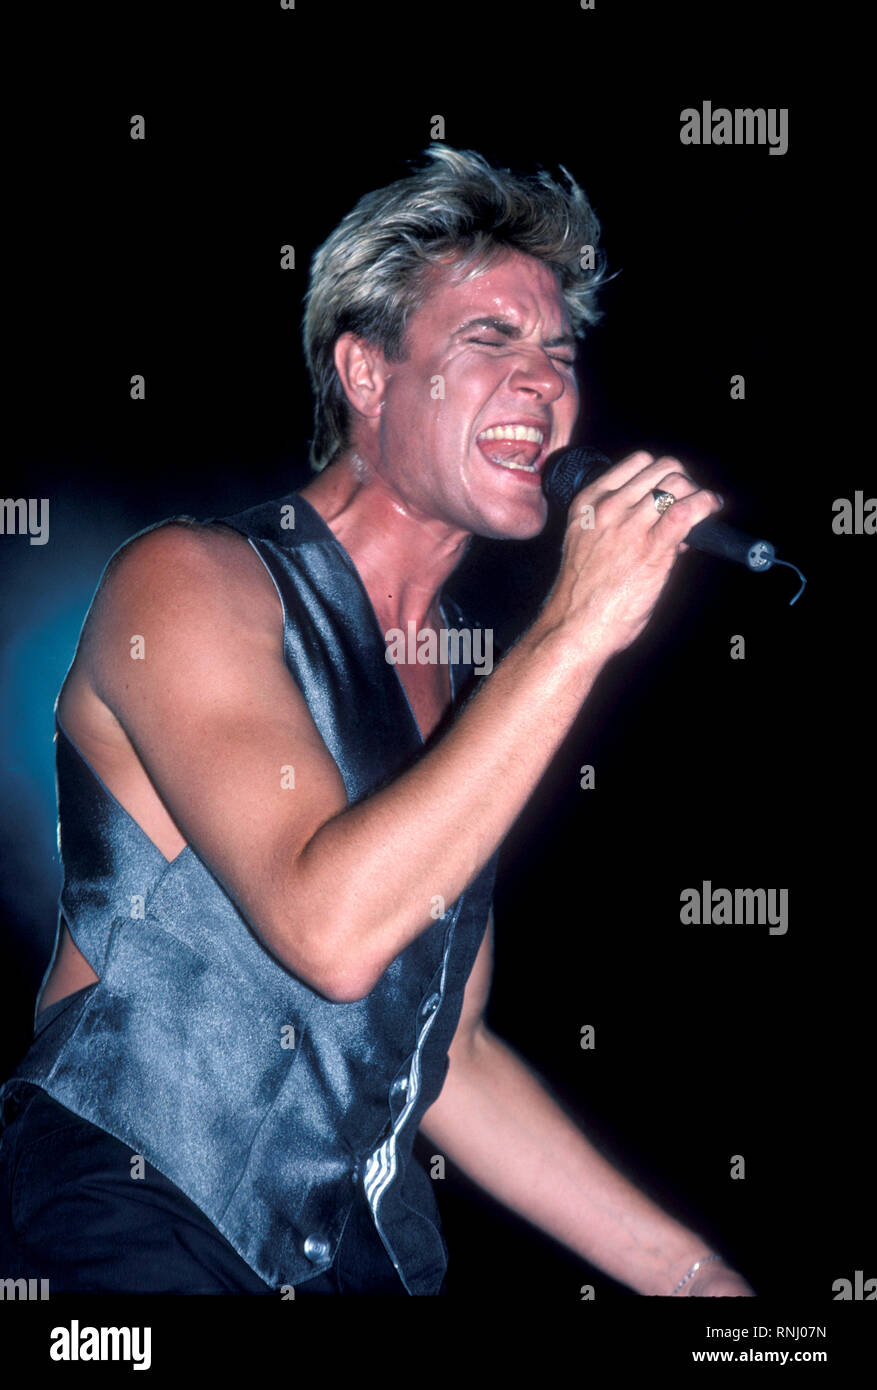 Duran Duran singer Simon LeBon is shown performing on stage during a 'live' concert appearance. Stock Photo